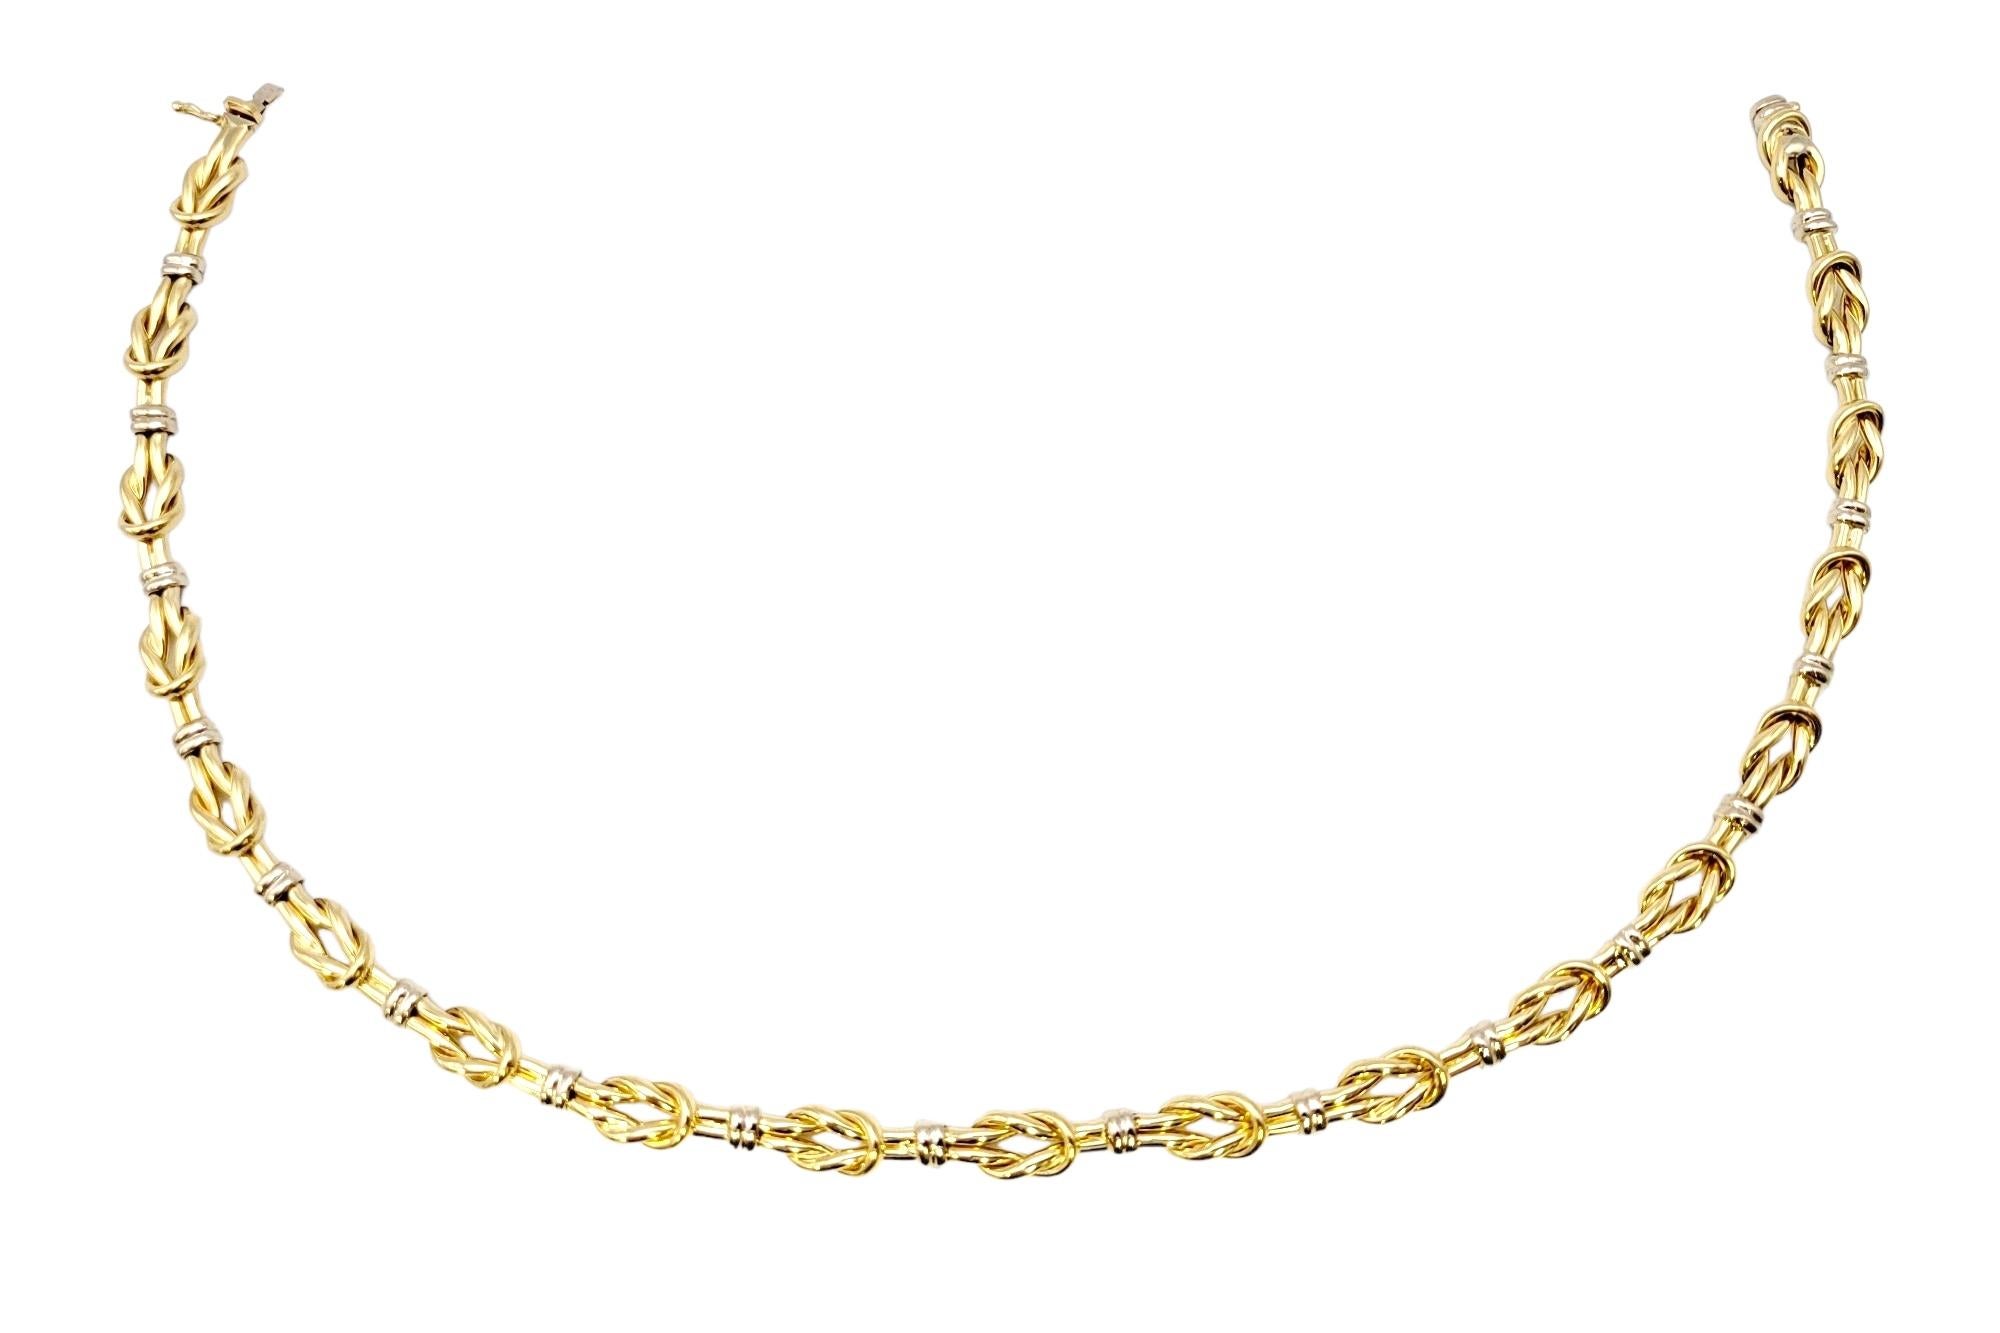 Roberto Coin Reef Knot Two-Tone Polished 18 Karat Gold Collar Necklace  In Good Condition For Sale In Scottsdale, AZ